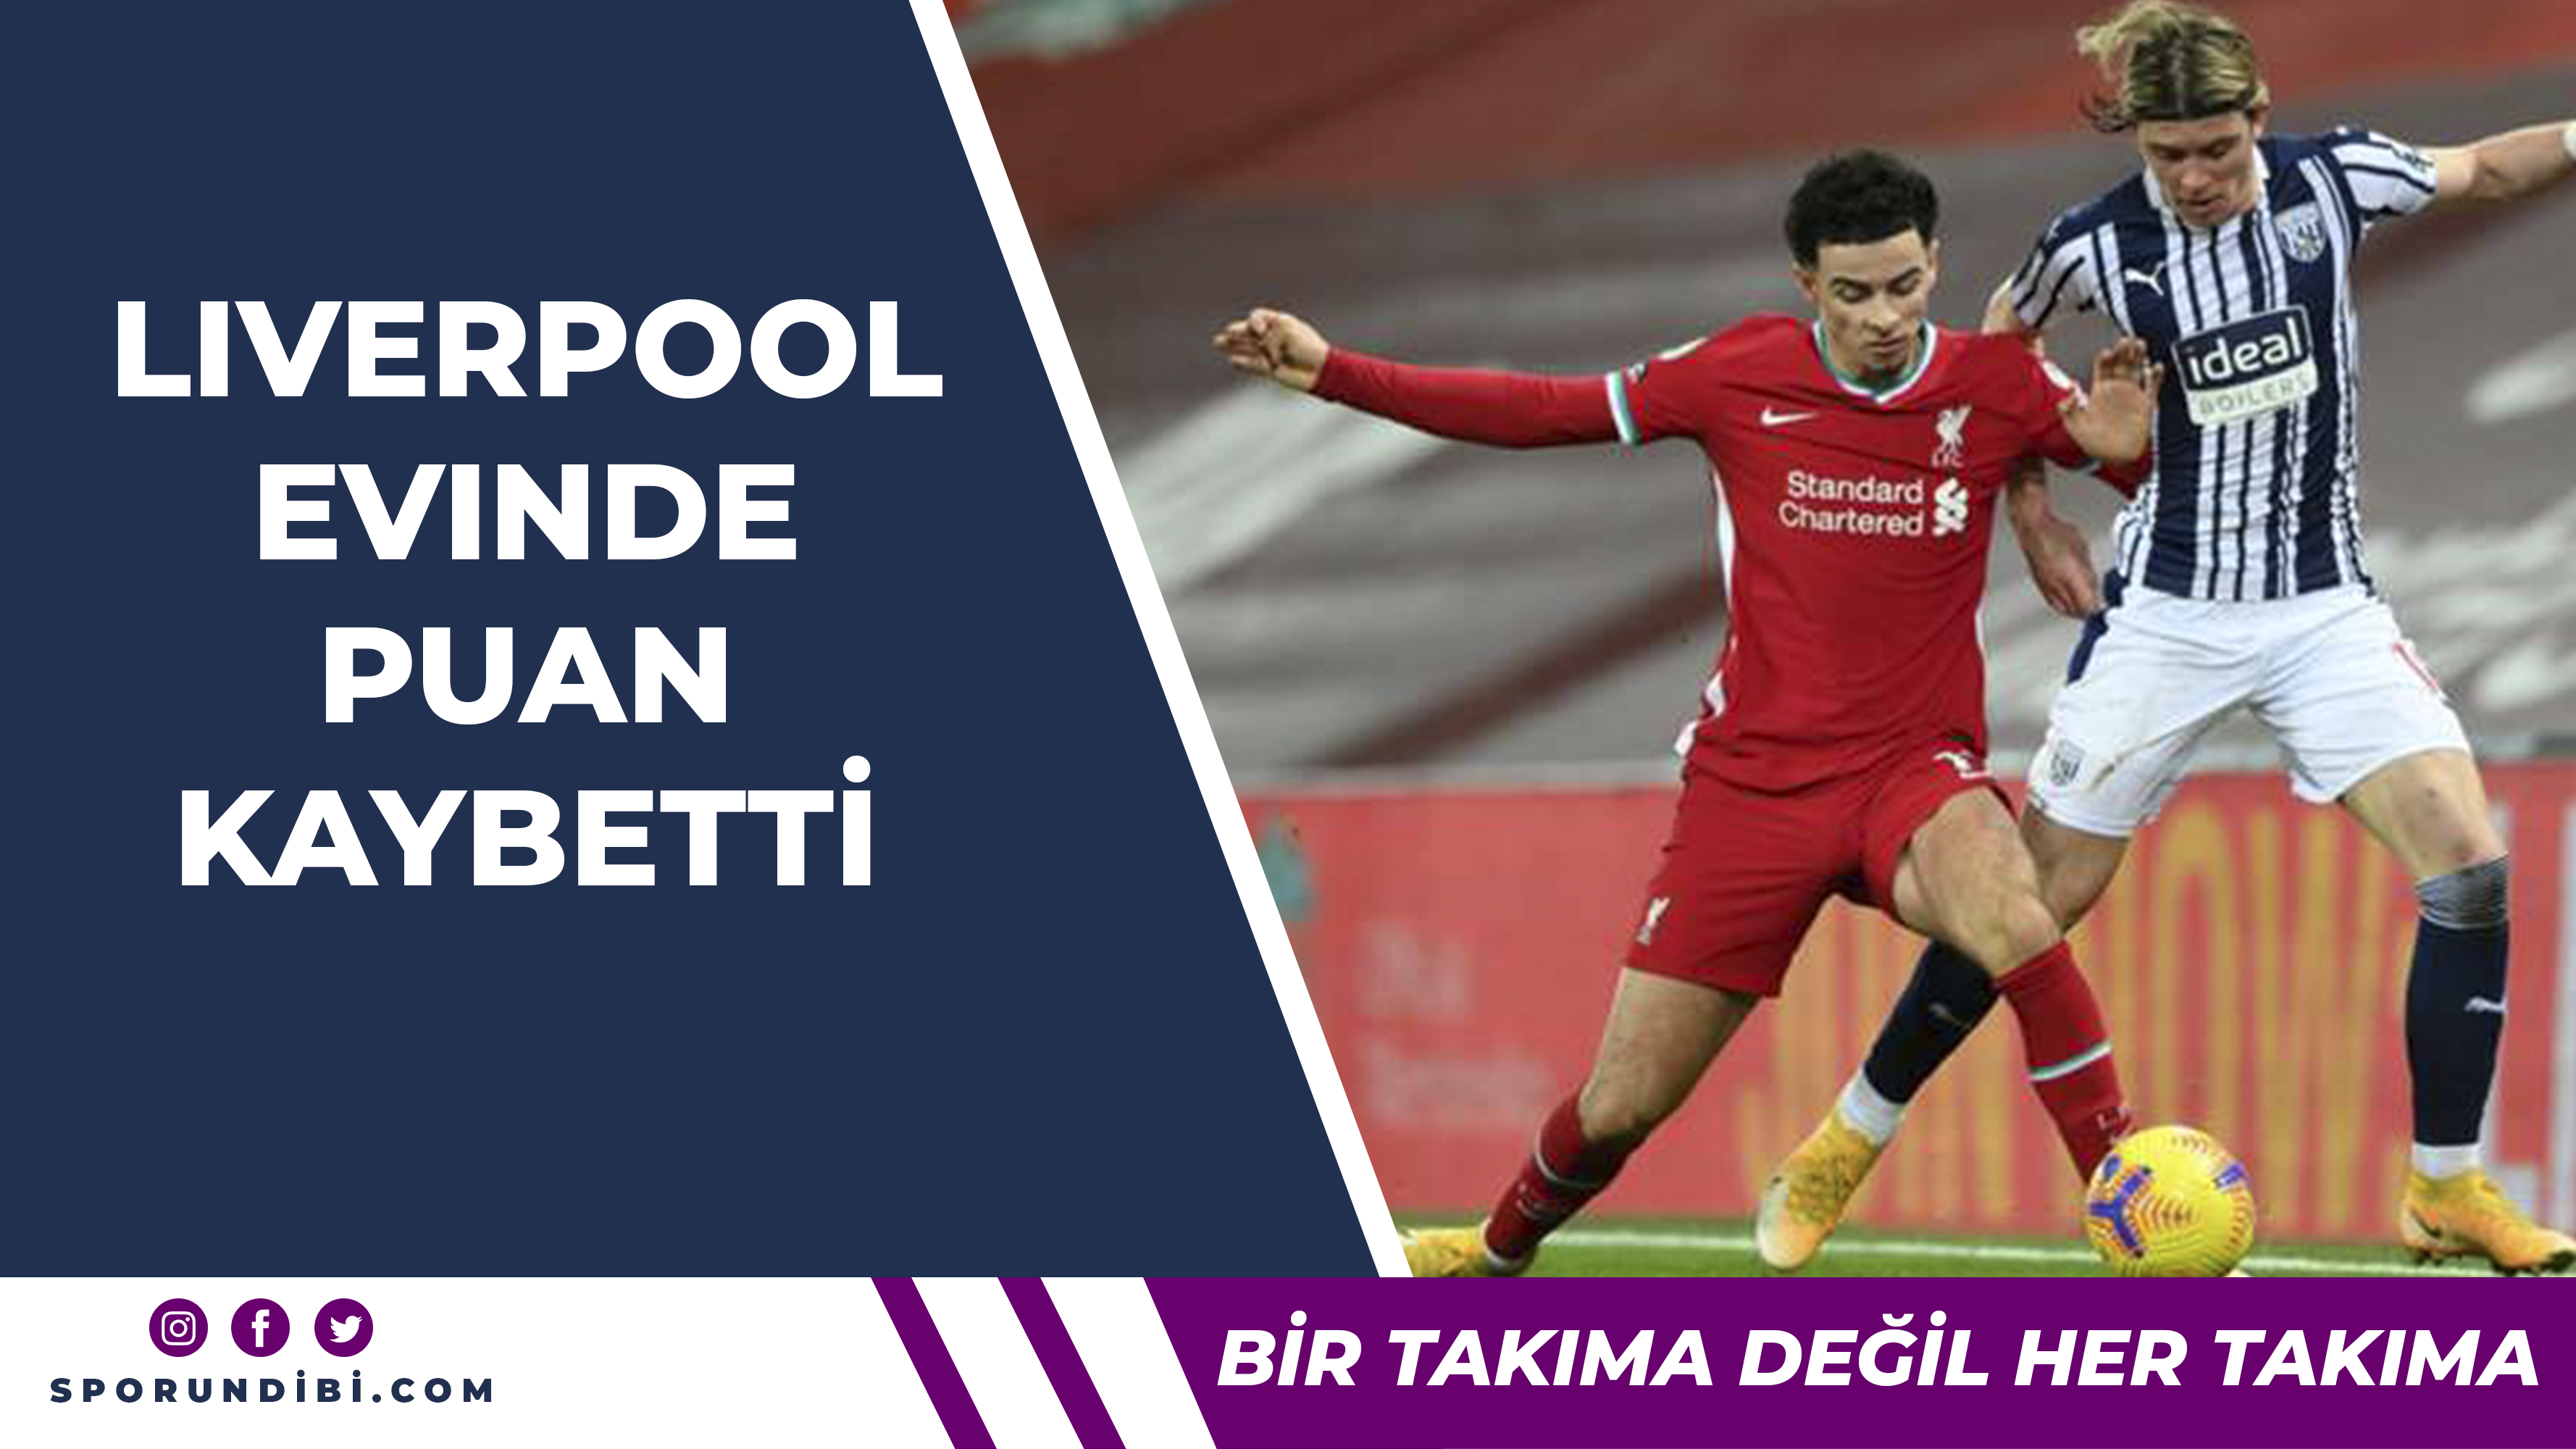 Lider Liverpool evinde puan kaybetti